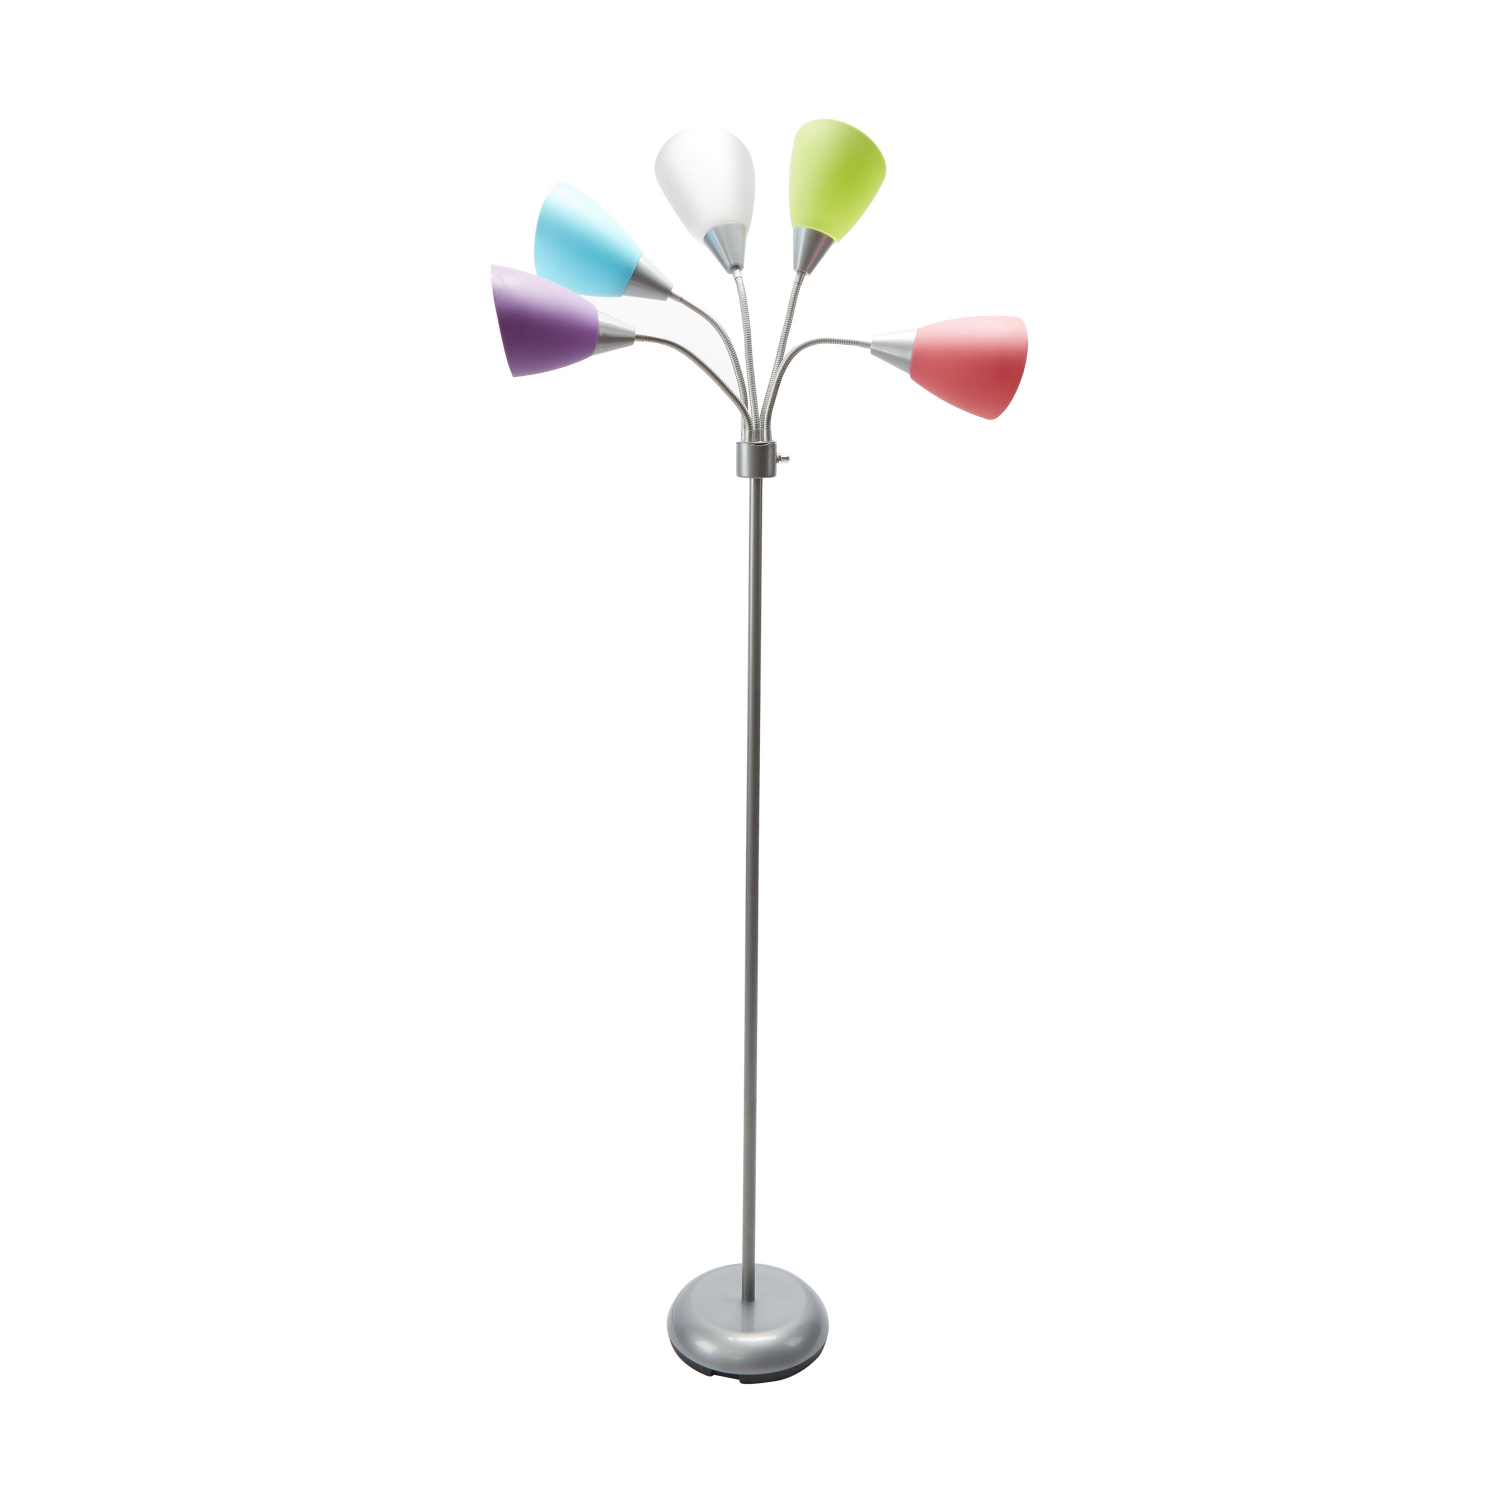 Details About Floor Lamp Stand W 5 Multi Color Light Shade Adjustable Arm Room Lighting Dorm within measurements 1500 X 1500